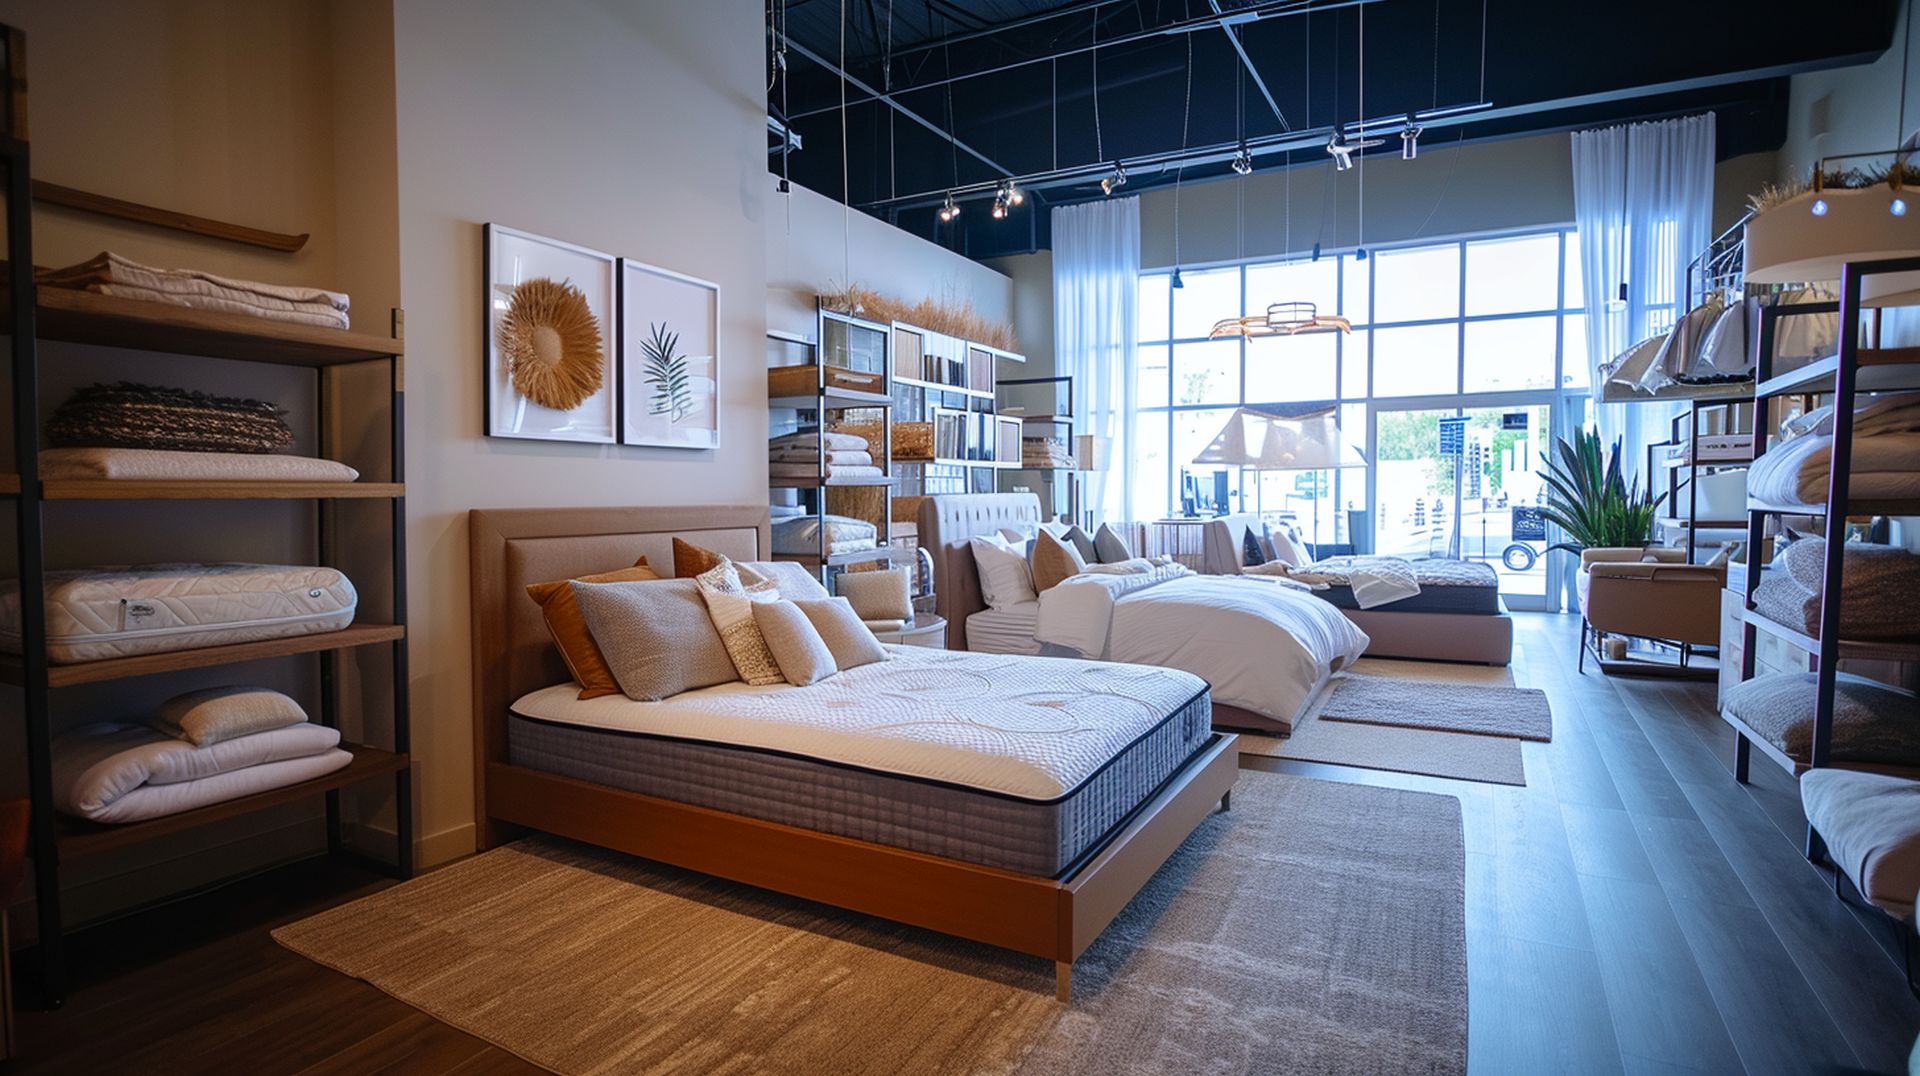 Local Fort Myers mattress stores have the best prices, sales, and deals if you're looking for a new mattress in Fort Myers